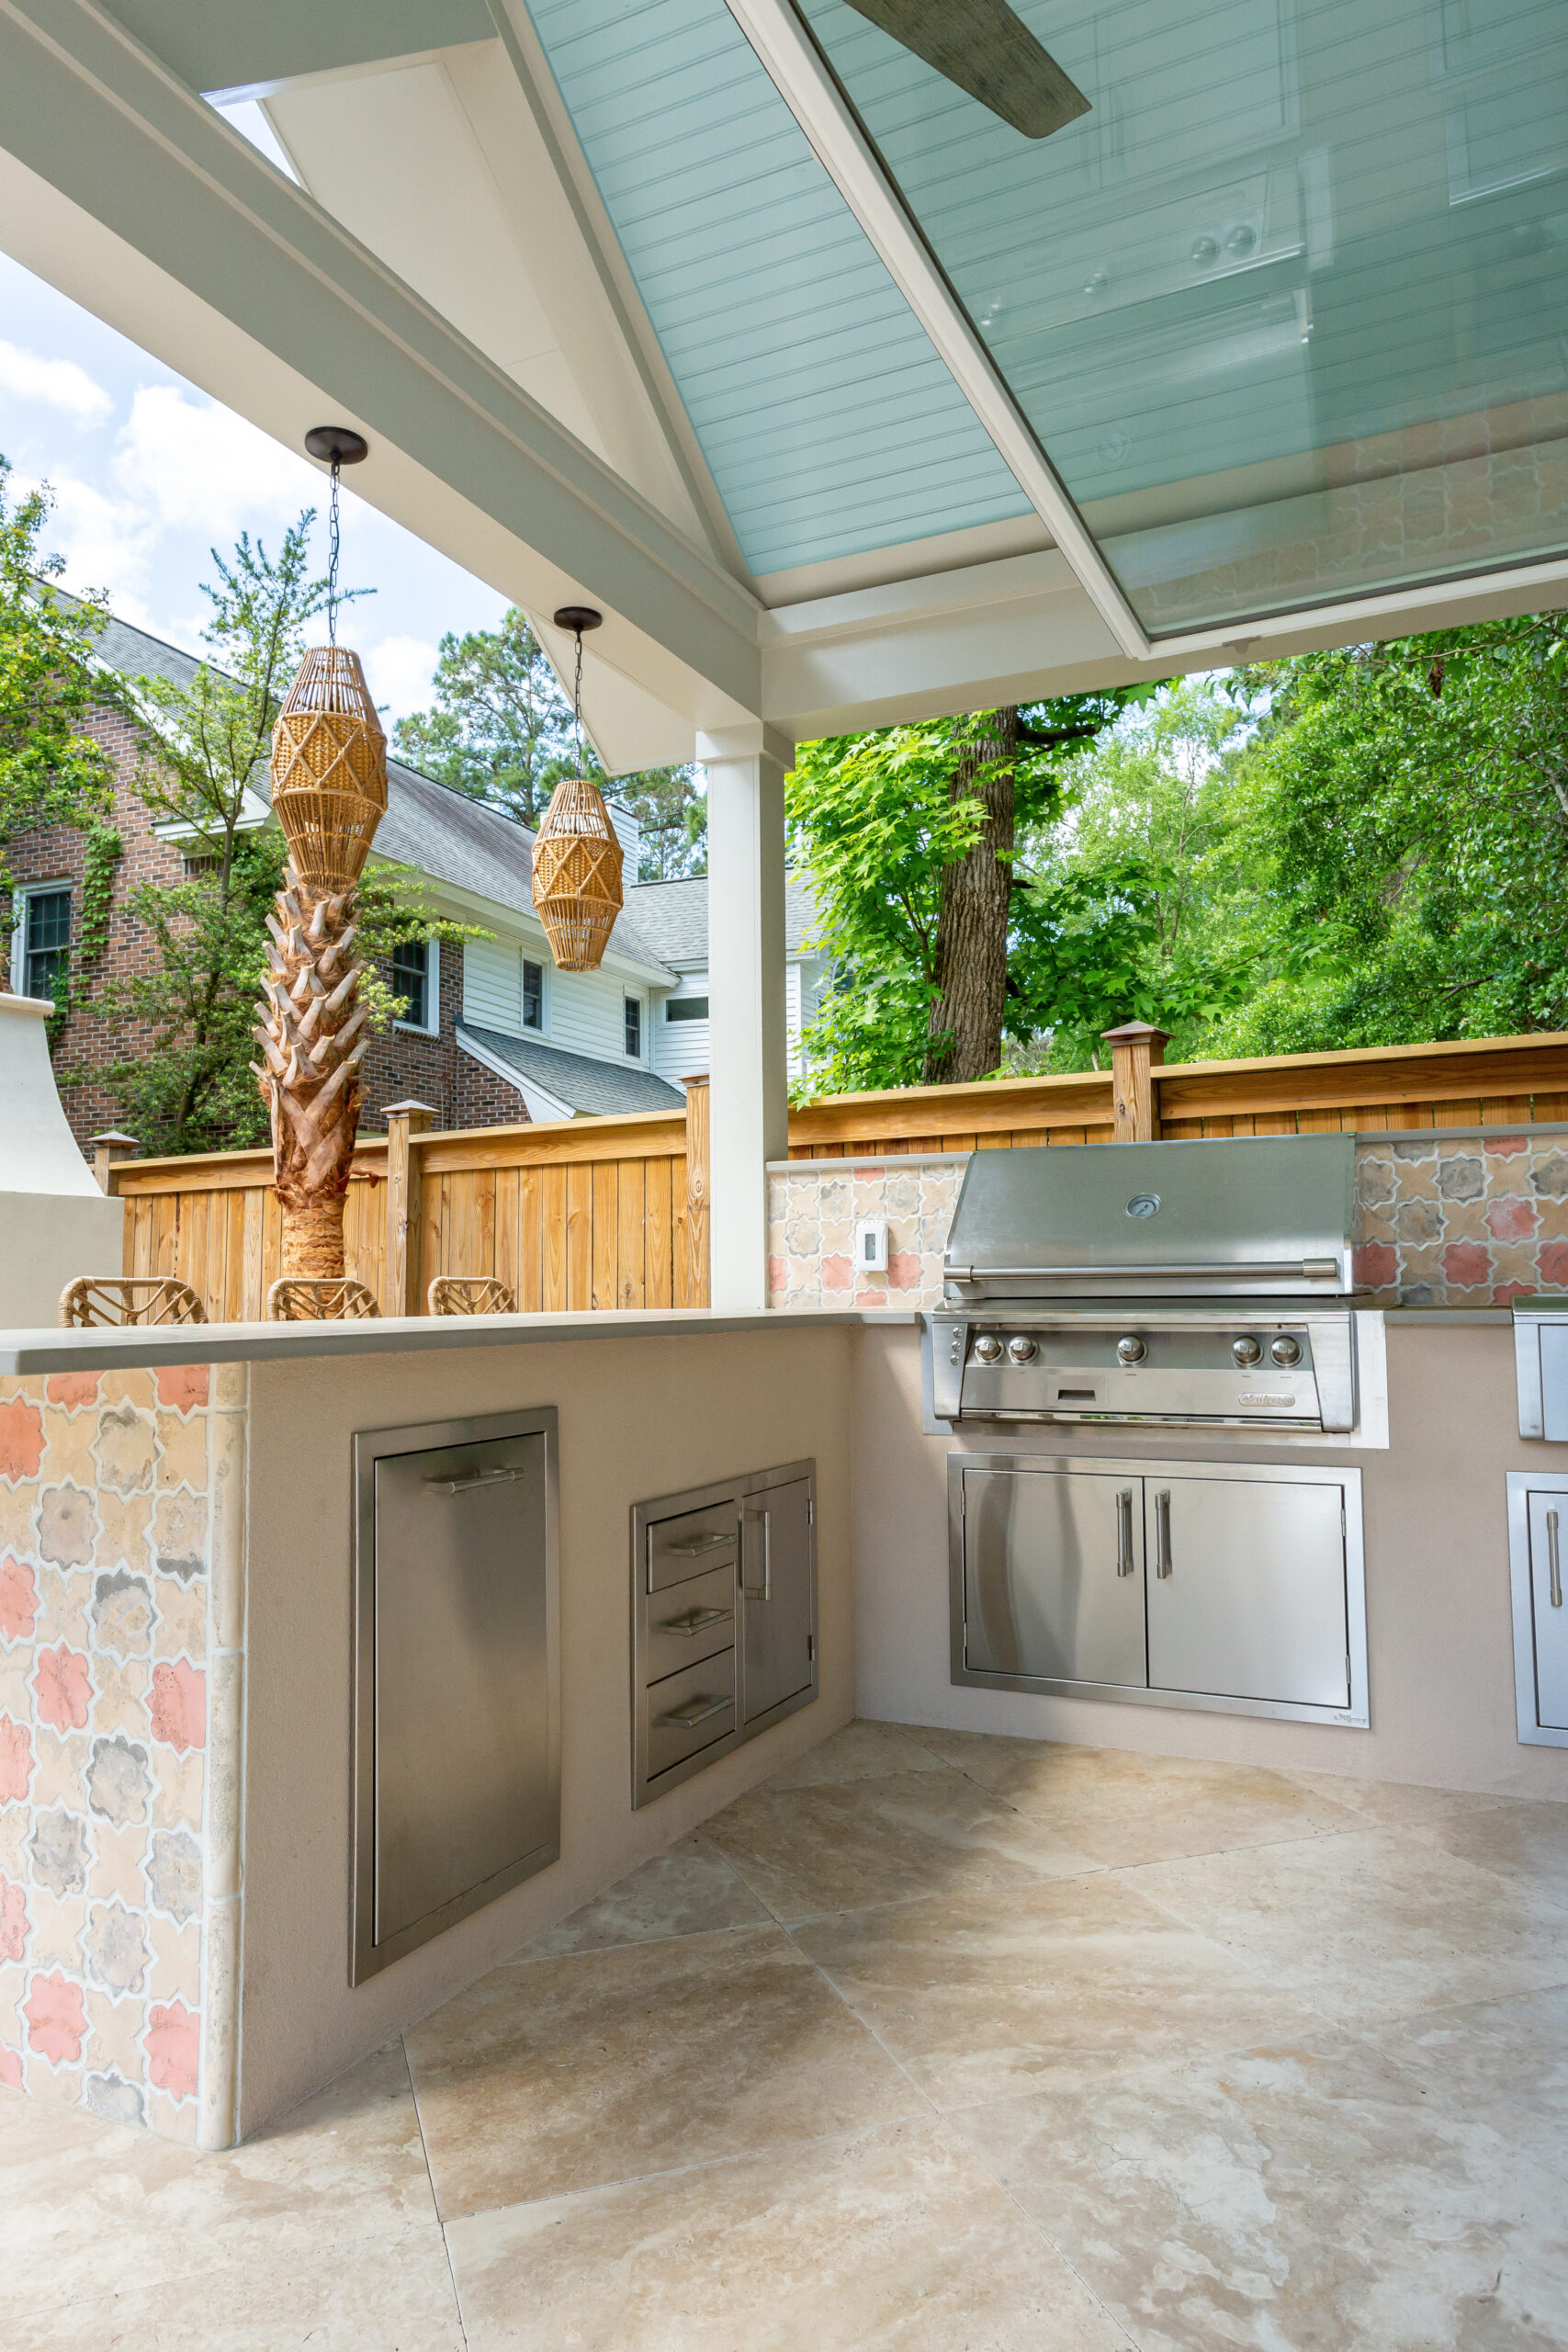 Outdoor Kitchen with Stainless Steel Grill, refrigerator & trash - CK-Contracting, Mount Pleasant, SC